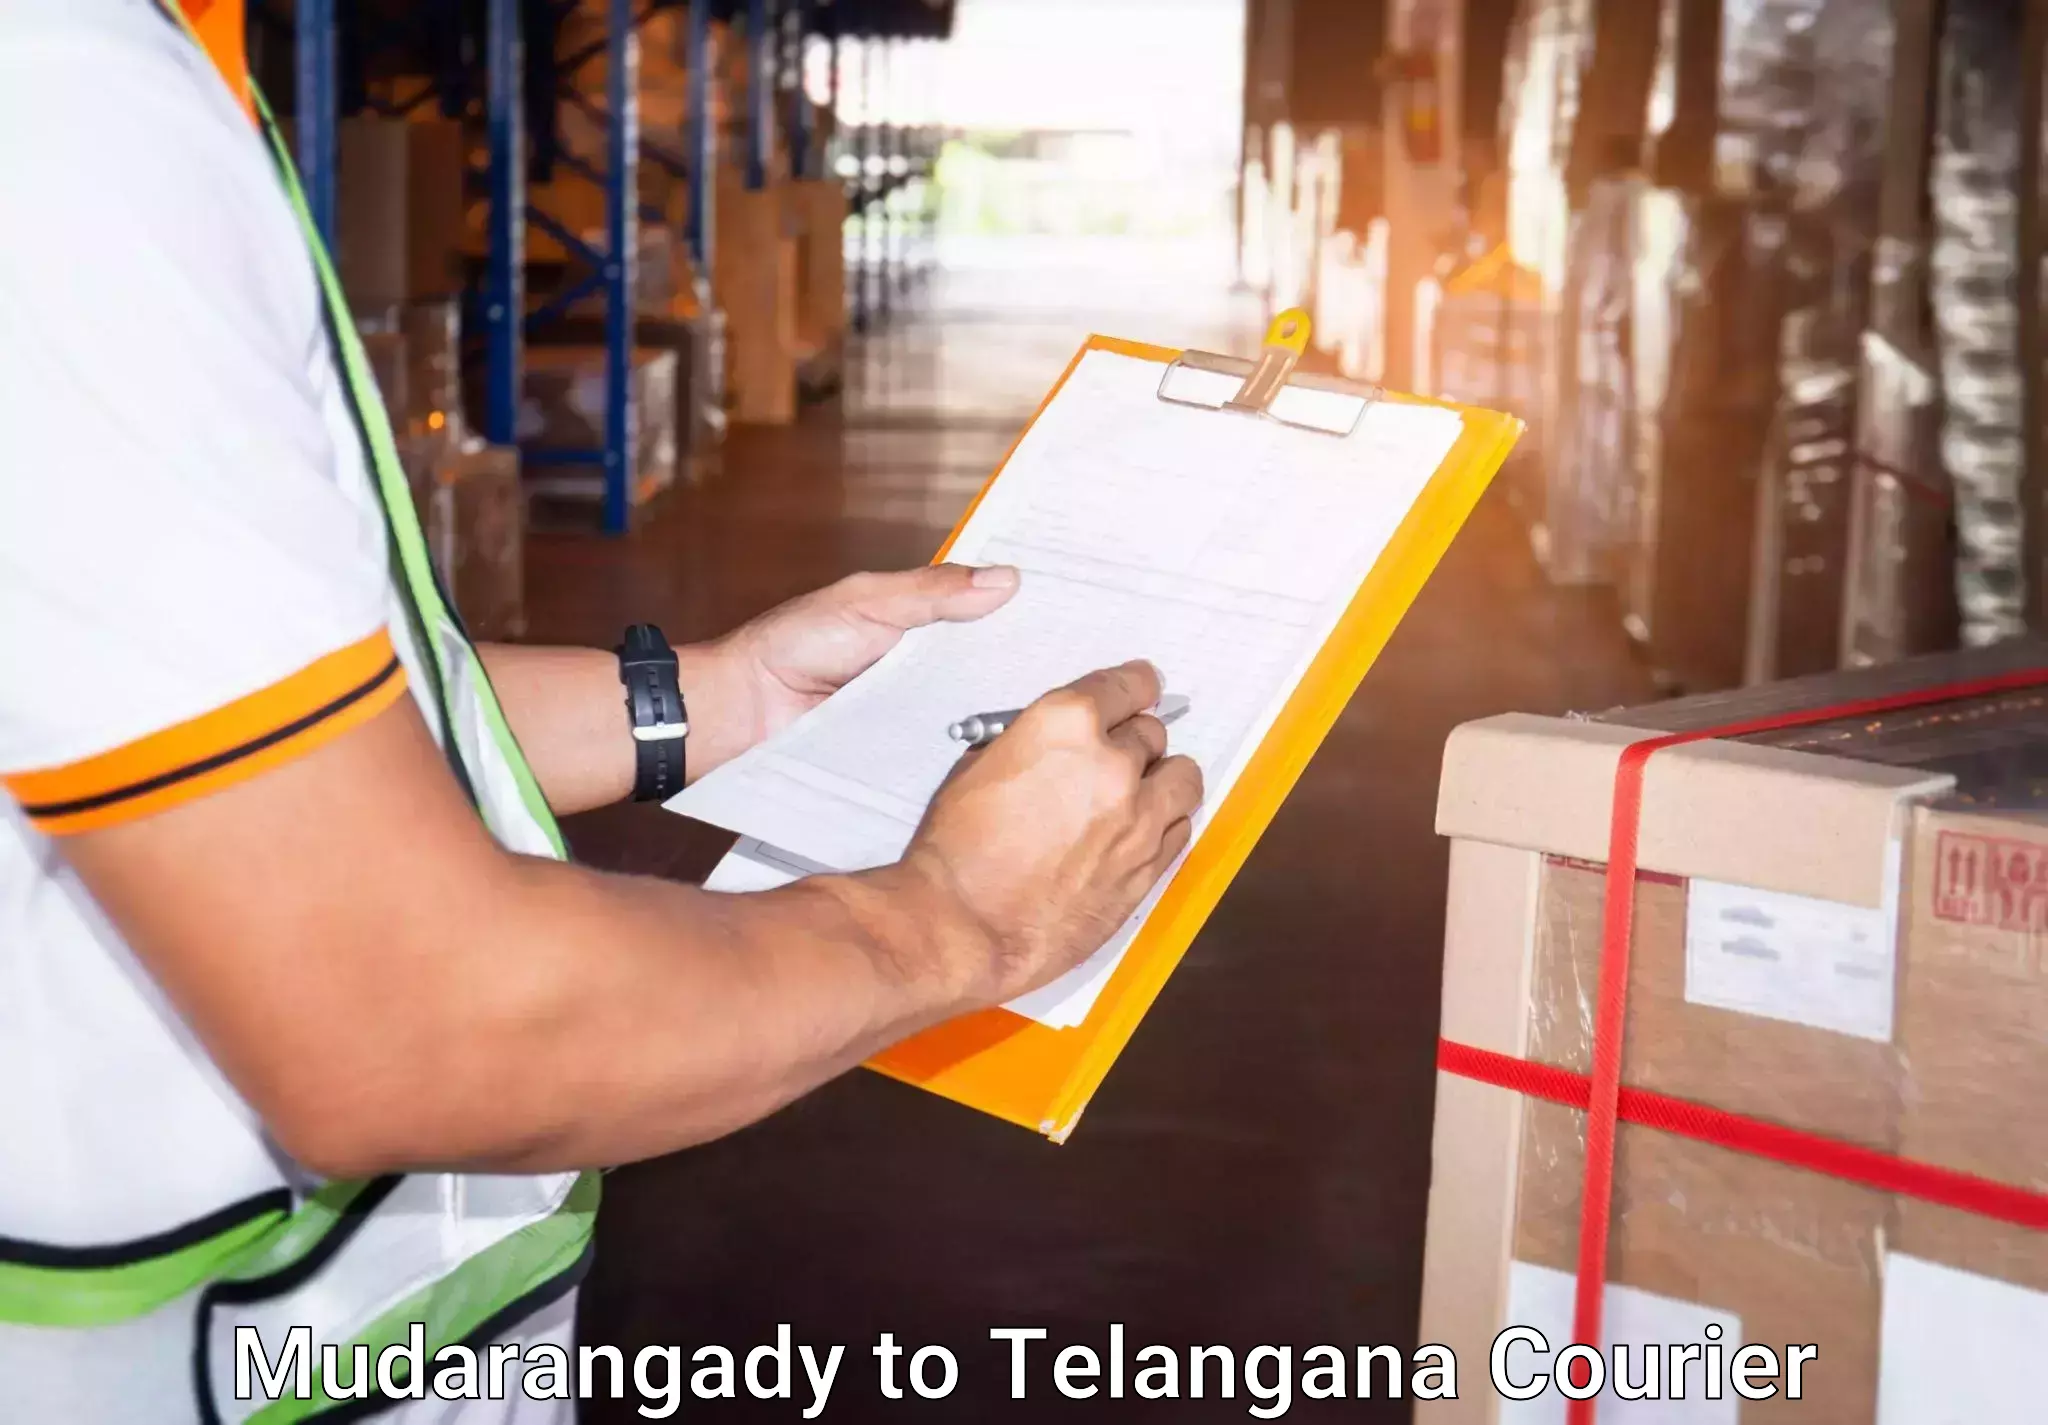 Personal luggage delivery in Mudarangady to Secunderabad